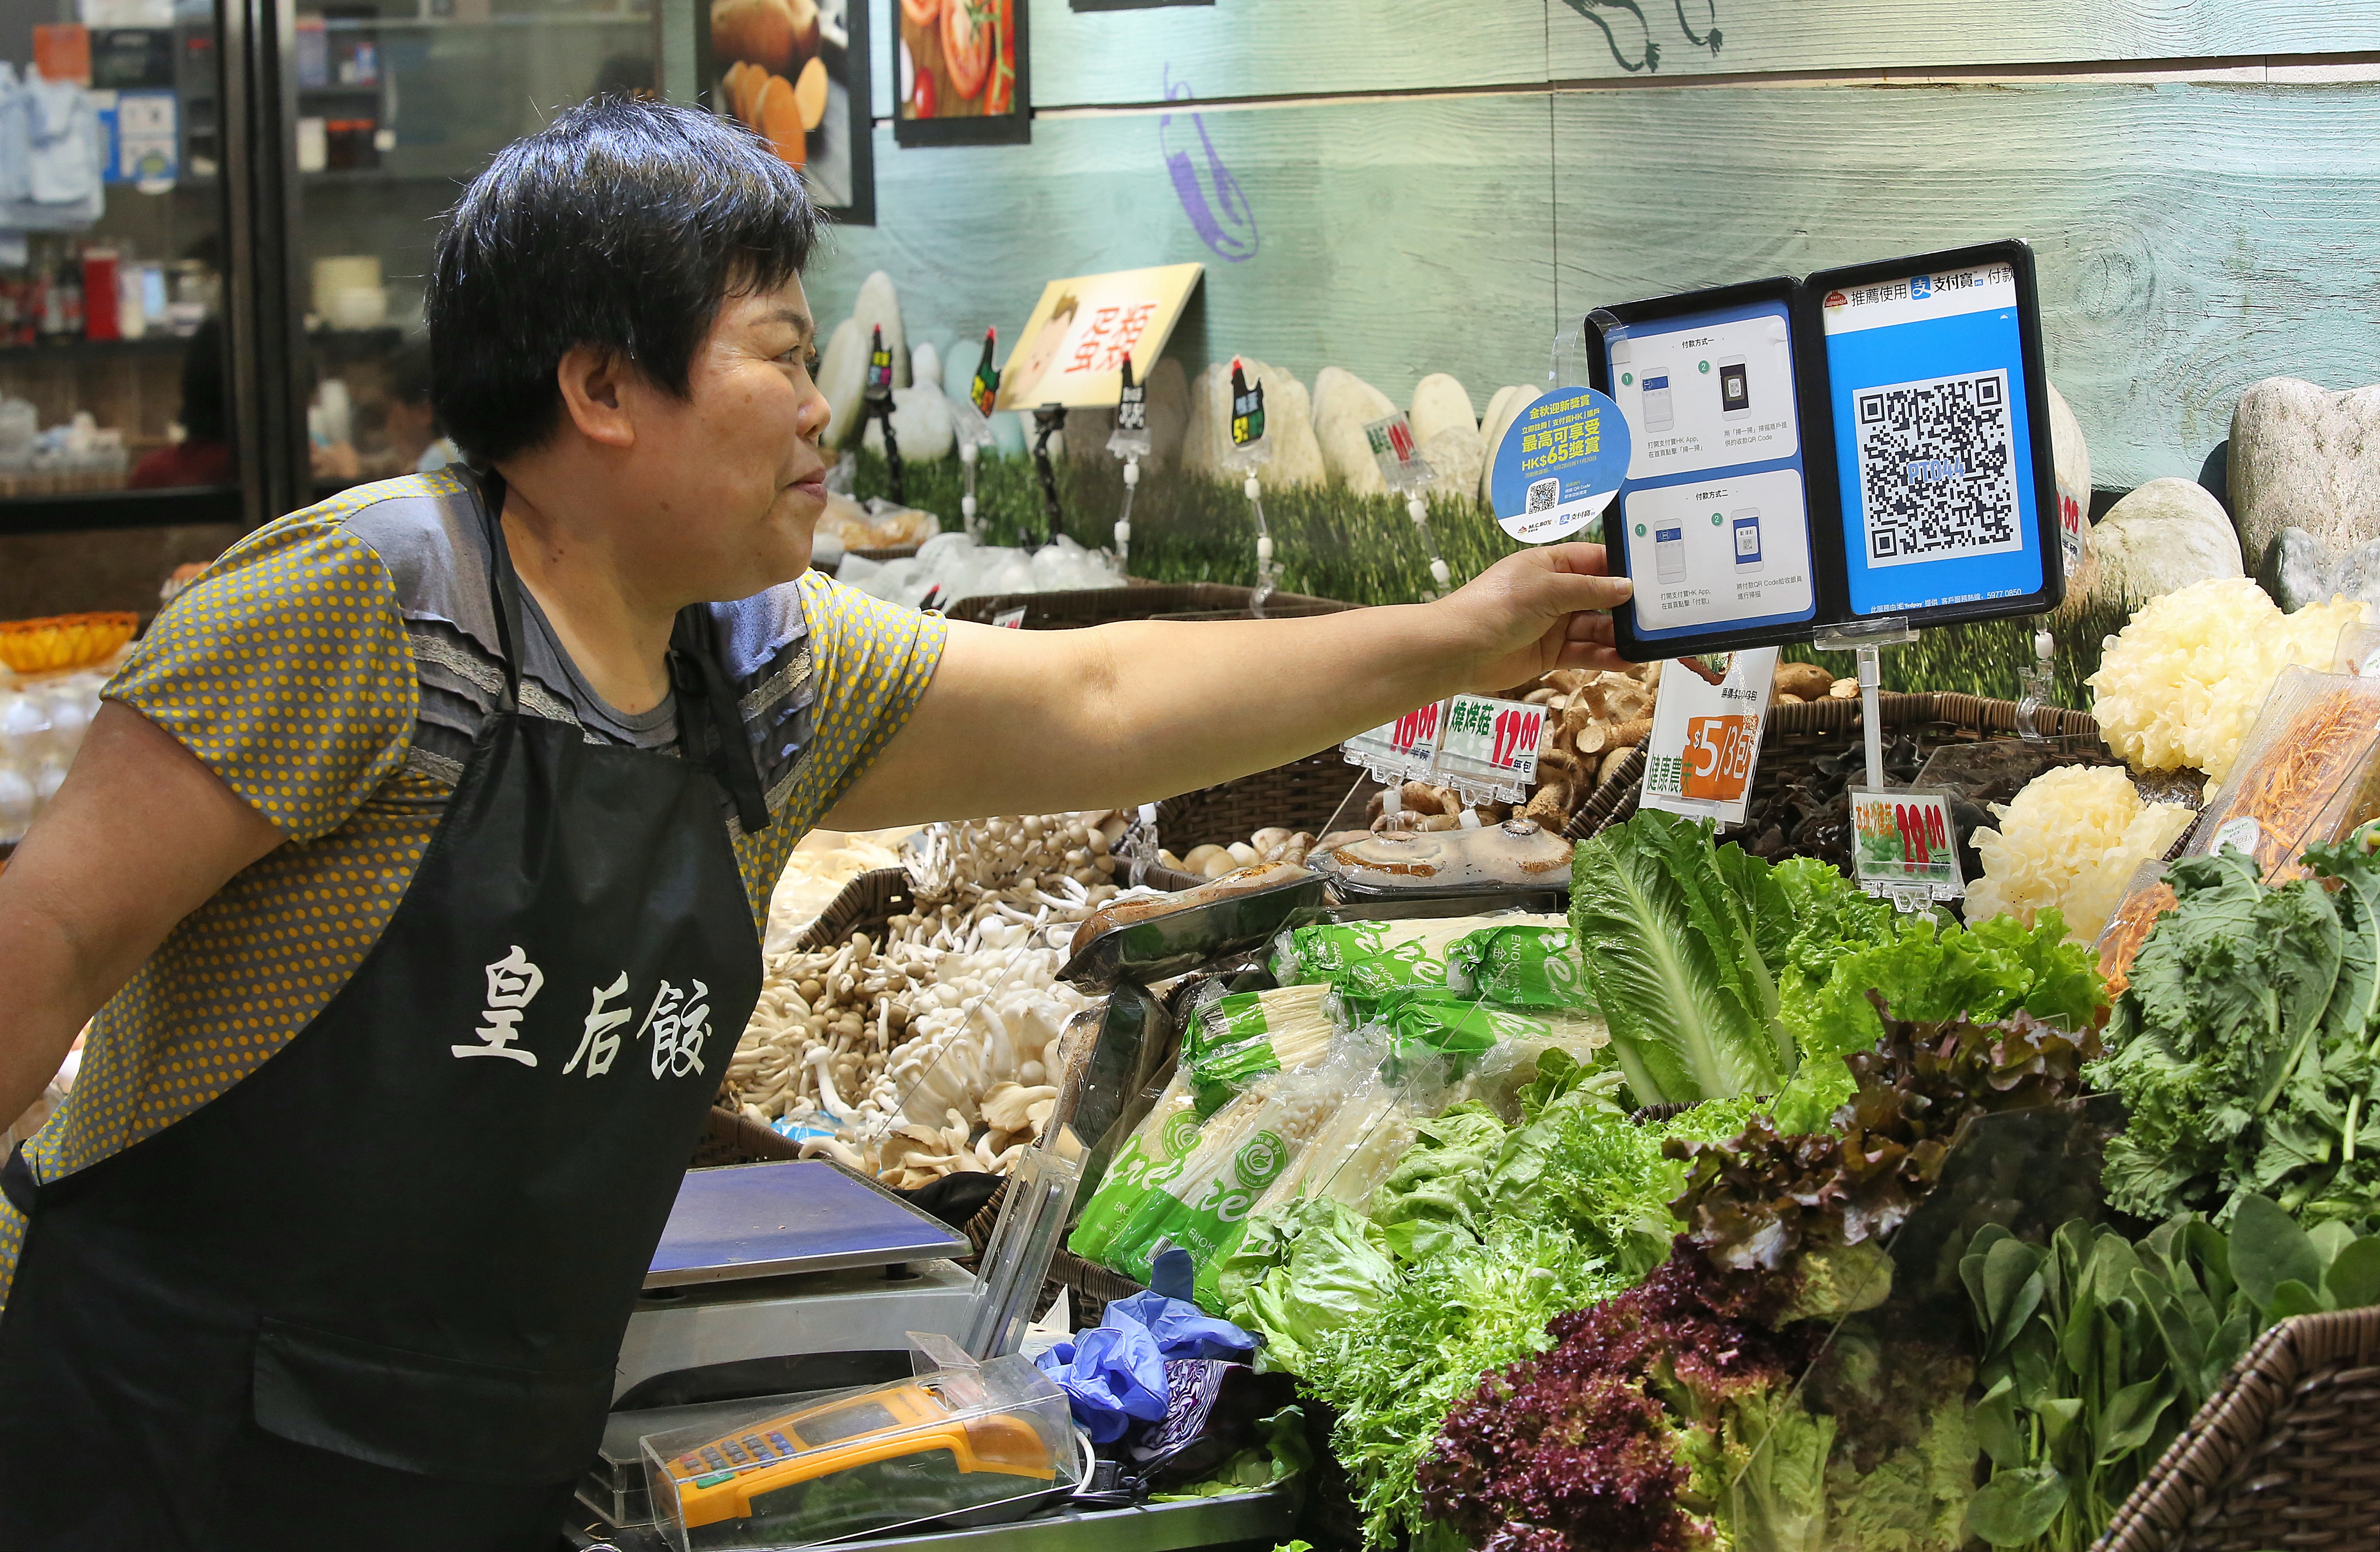 A merchant with a QR code payment system at a stall inside Po Tat Market in Sau Mau Ping. Photo: Edmond So